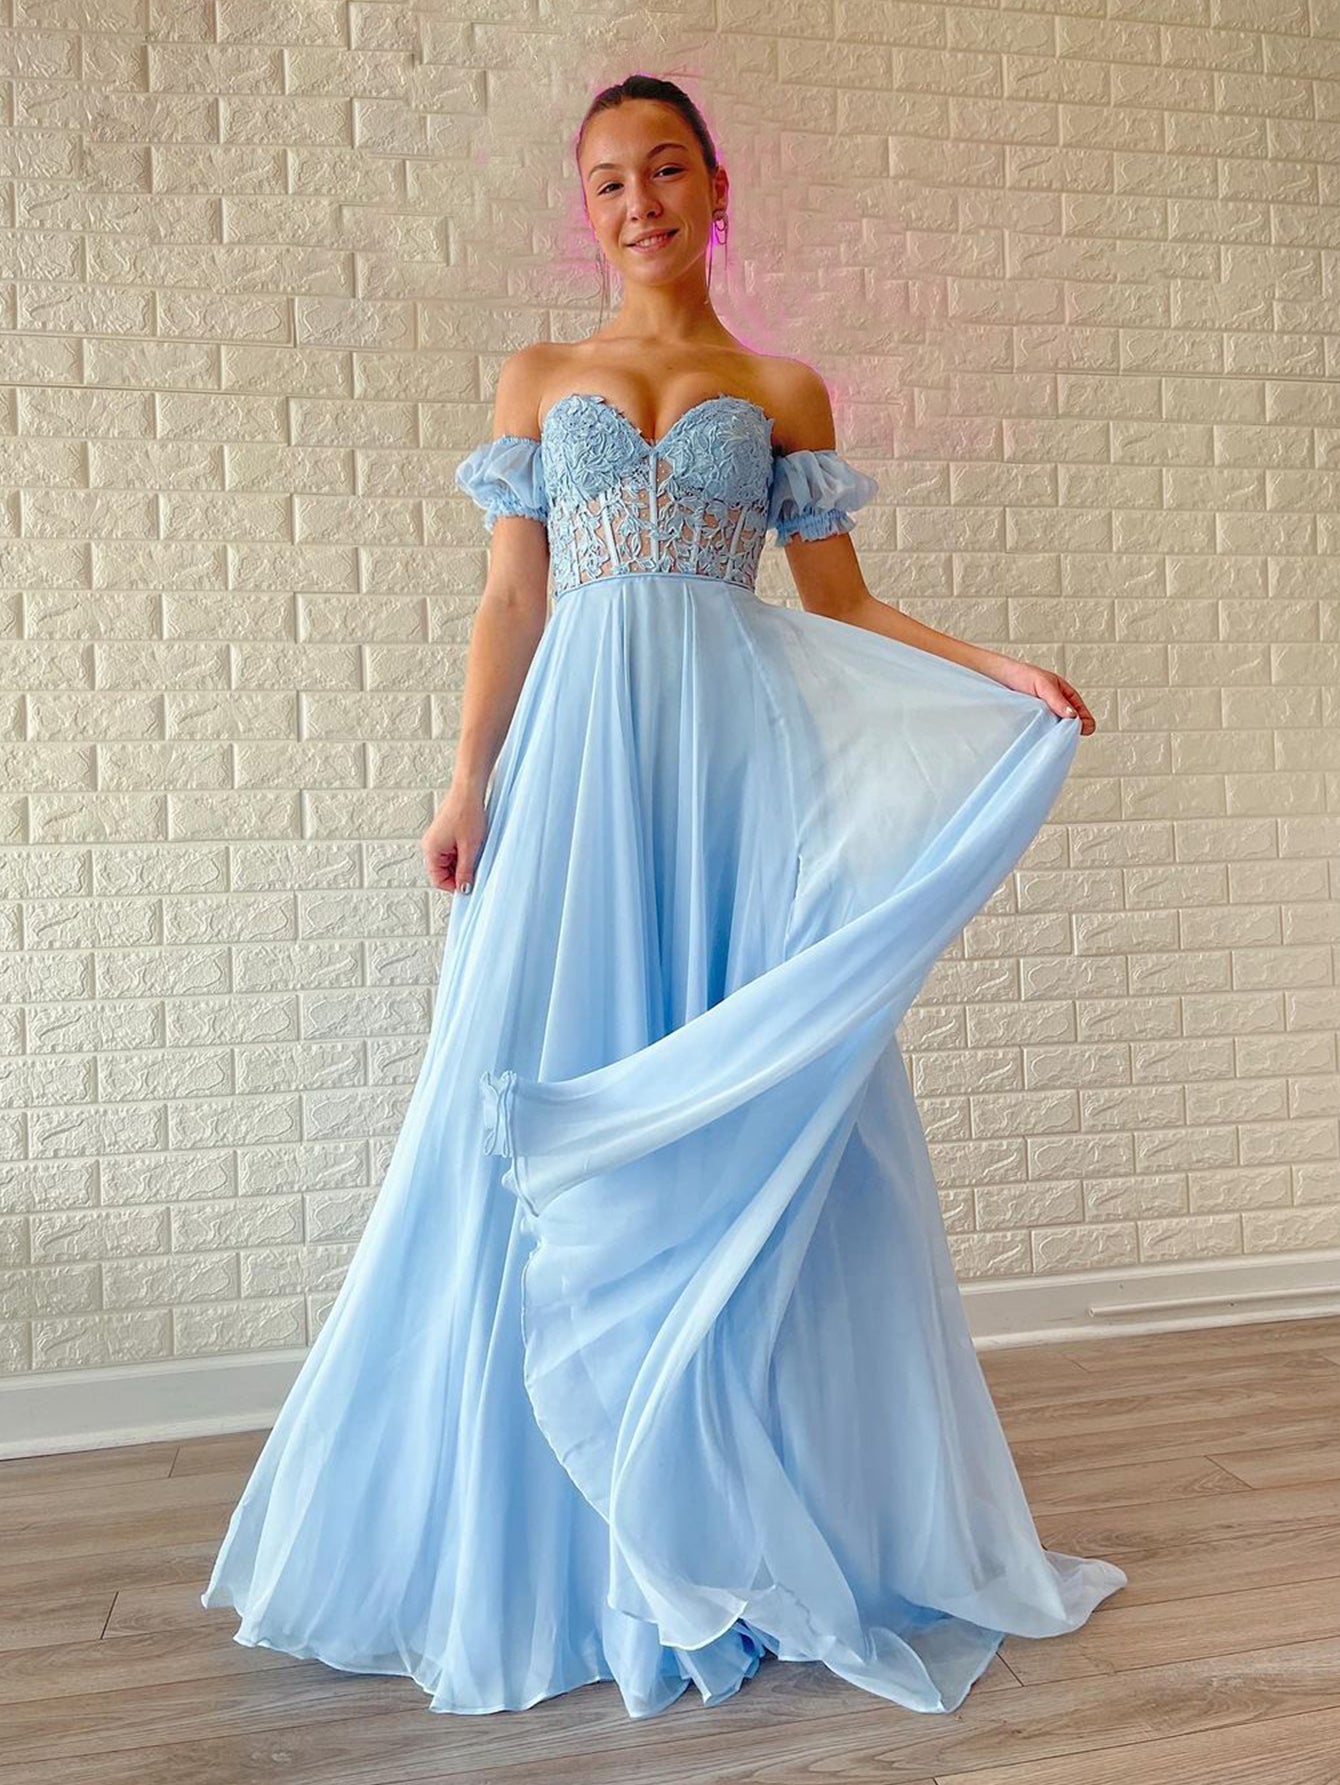 dressimeA-Line Chiffon Applique Sweetheart Prom Dress with Puff Sleeves 